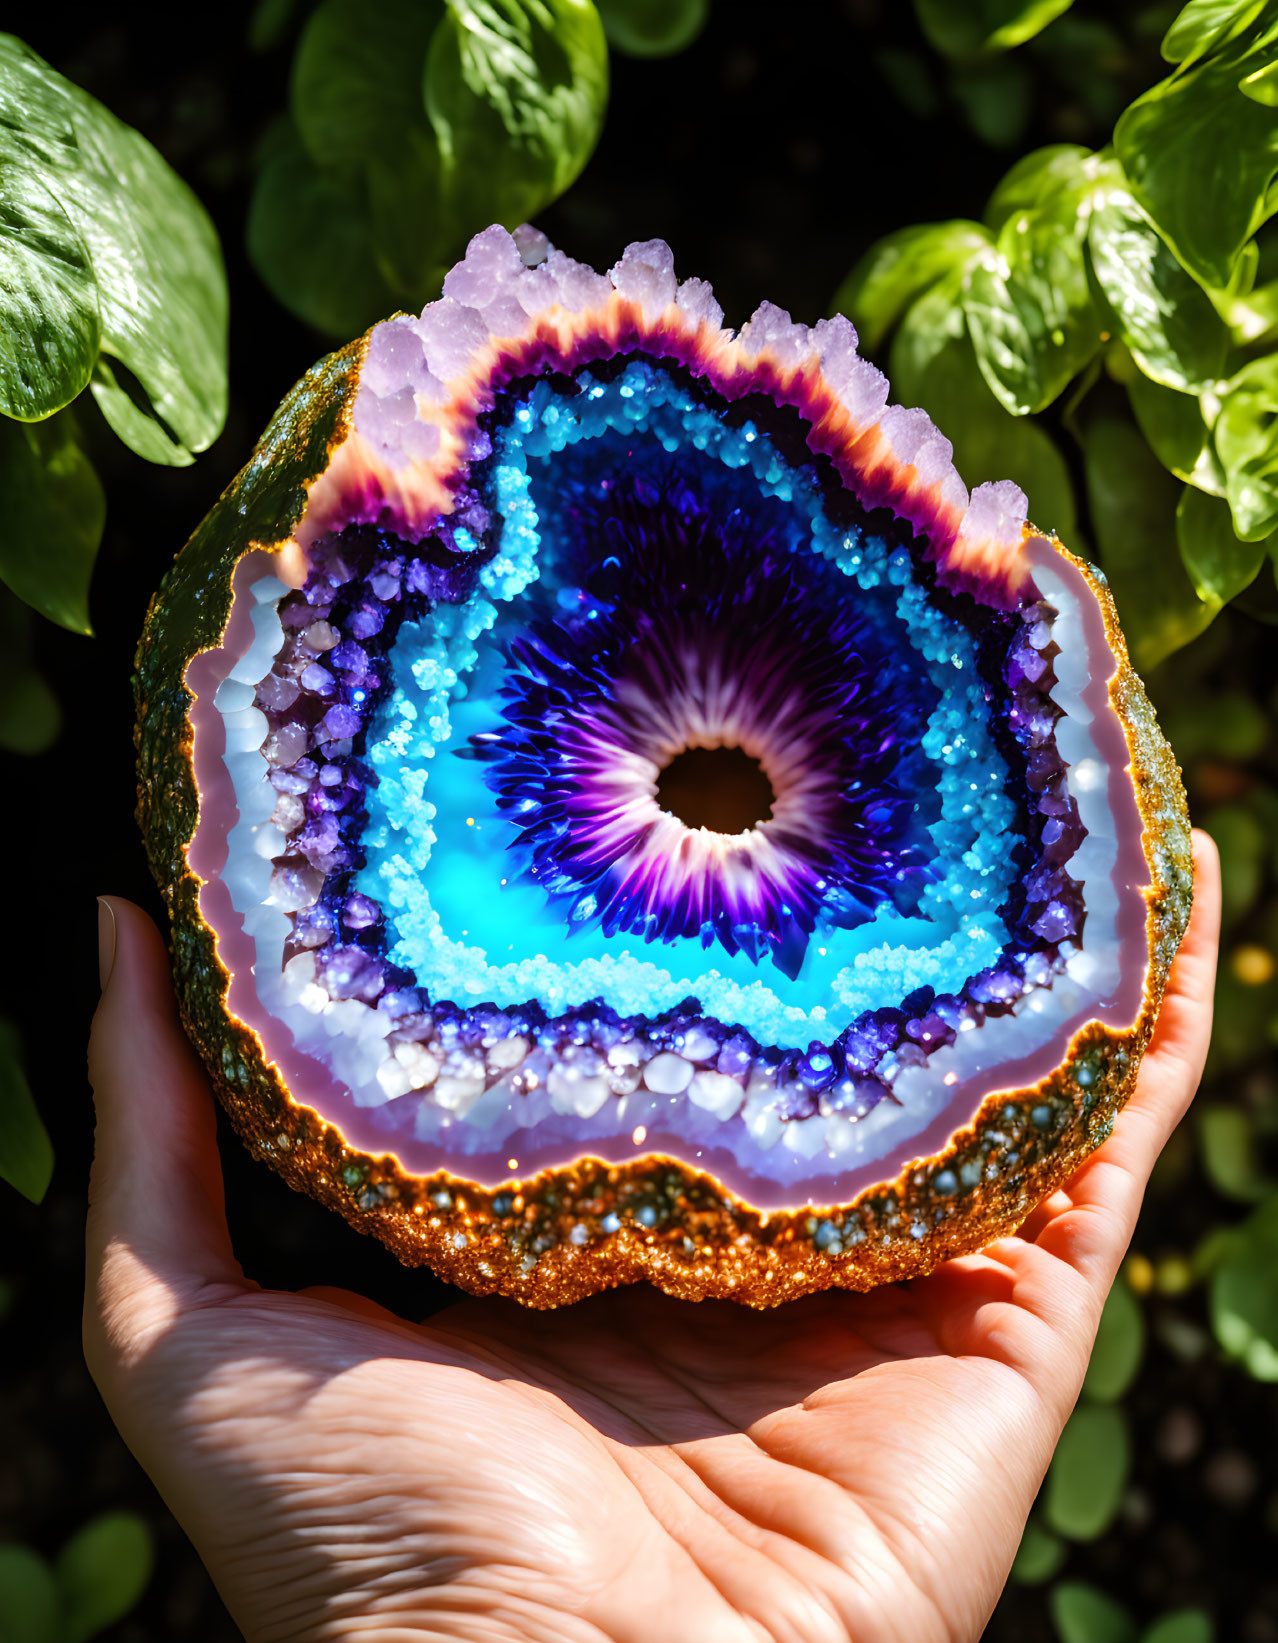 Vibrant geode with purple, blue, and white crystals held by a hand against green leaves